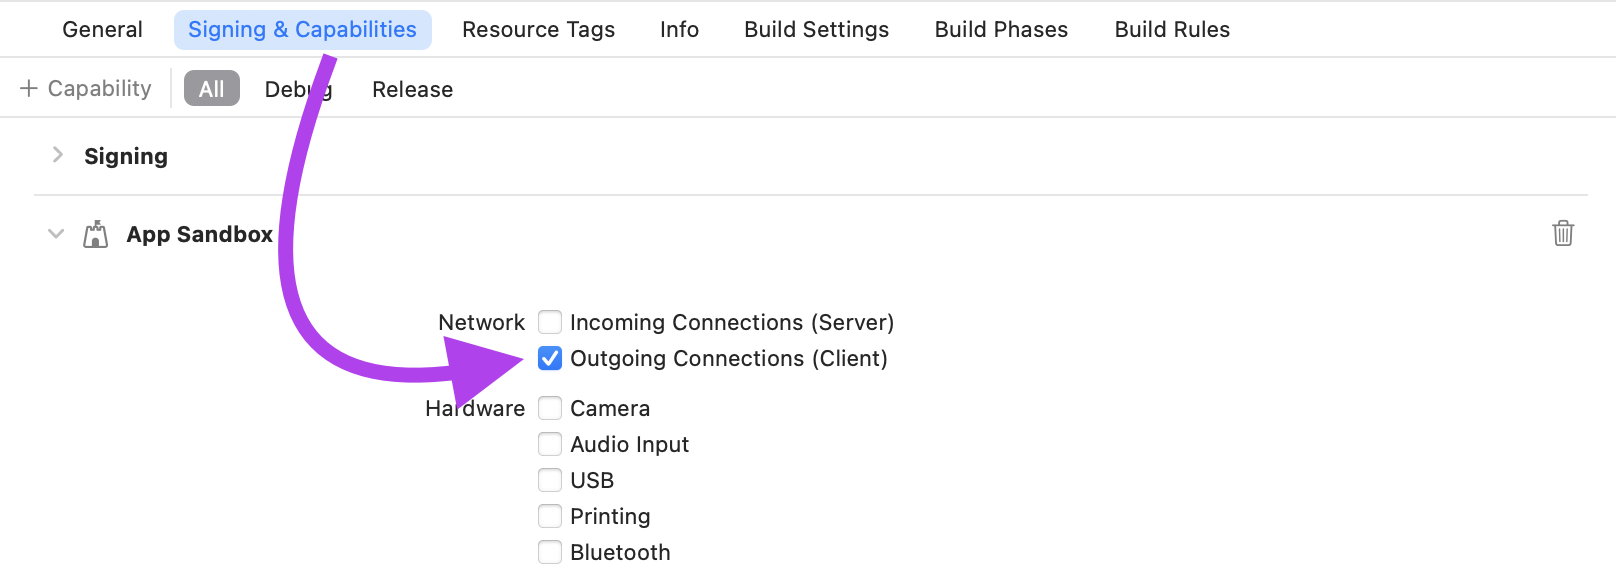 Xcode target view showing the Signing & Capabilities tab with and arrow pointing to a checked Outgoing Connections (Client) option